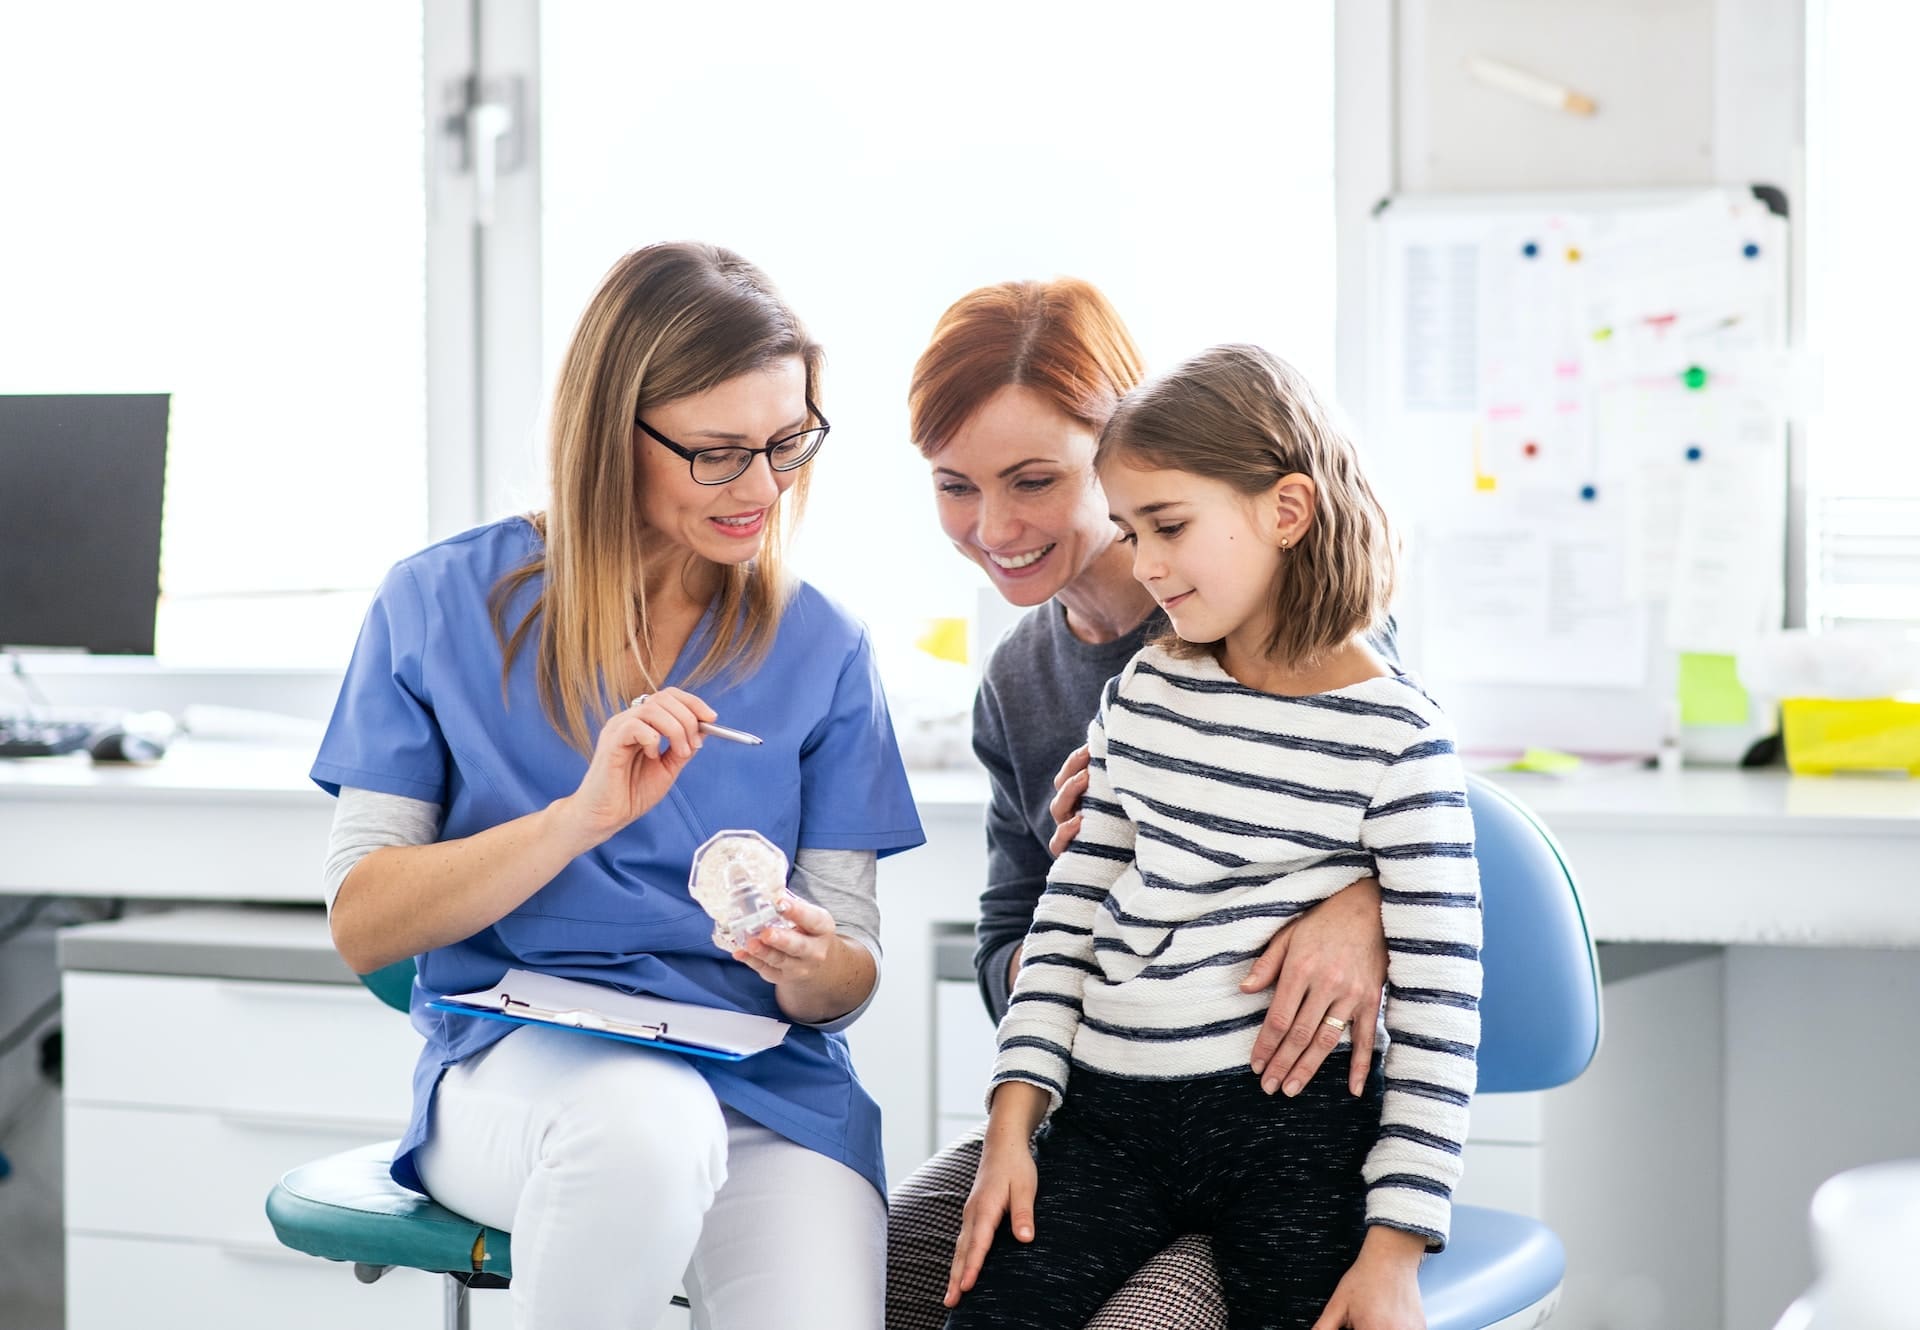 A child calmly interacting with a pediatric dentist, illustrating a positive dental visit experience.